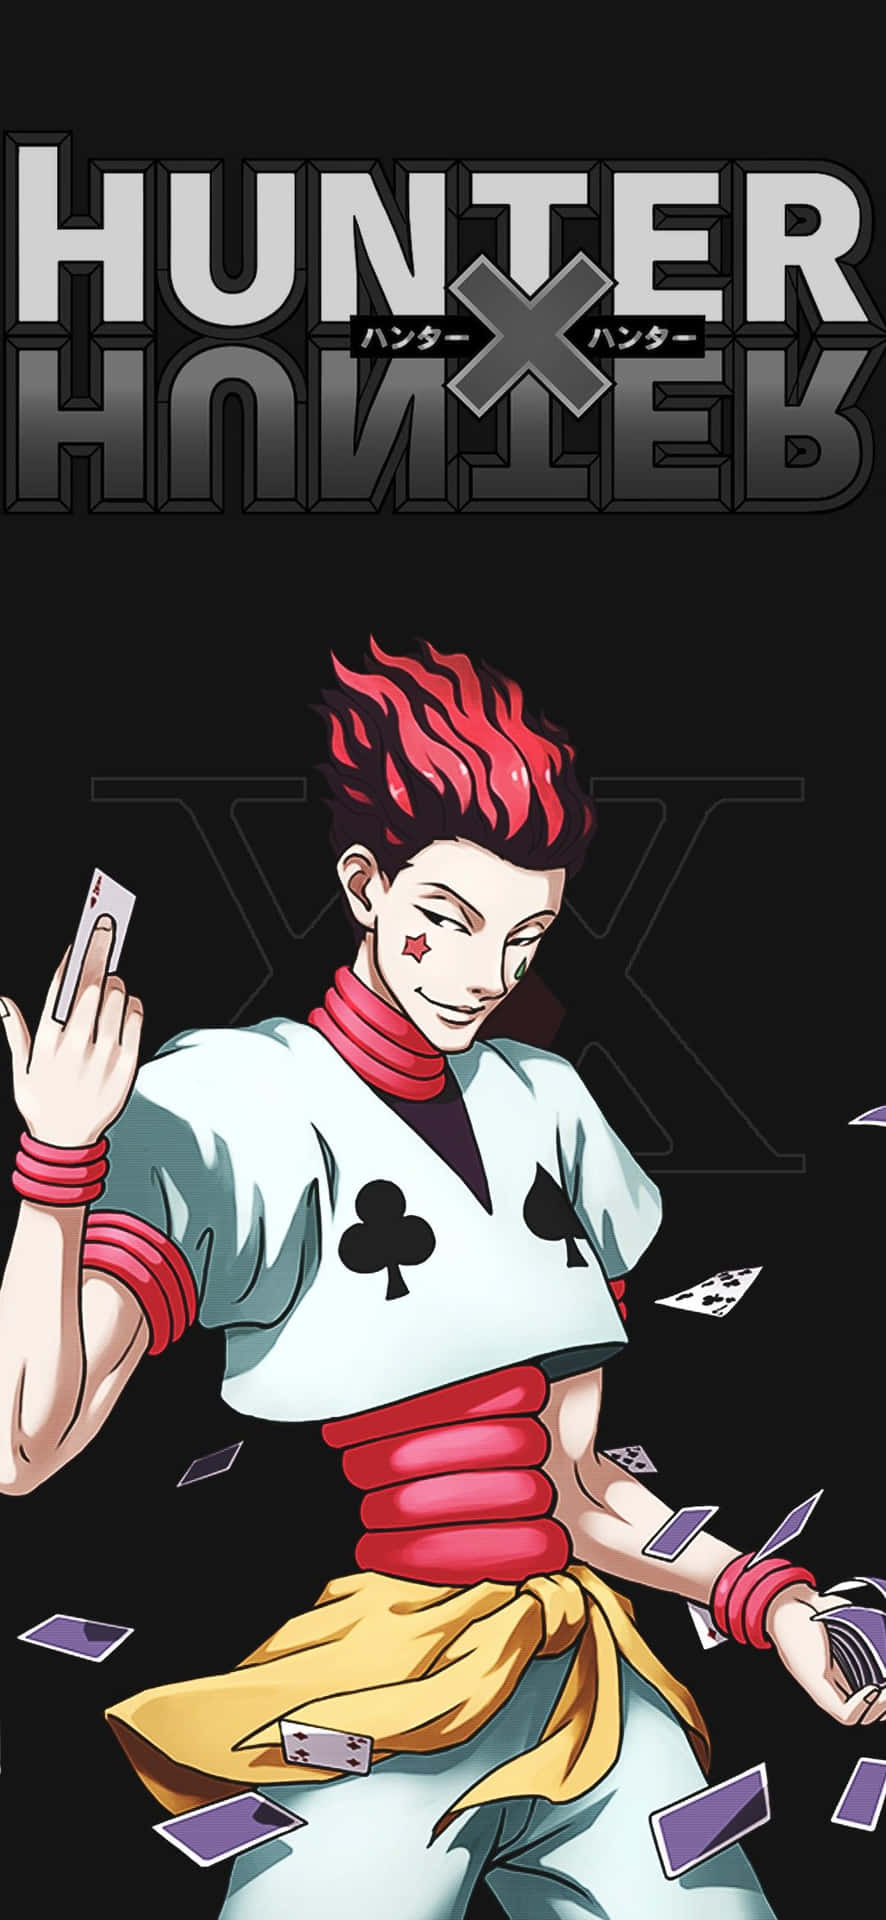 Upgrade your life with Hisoka's revolutionary mobile phone. Wallpaper